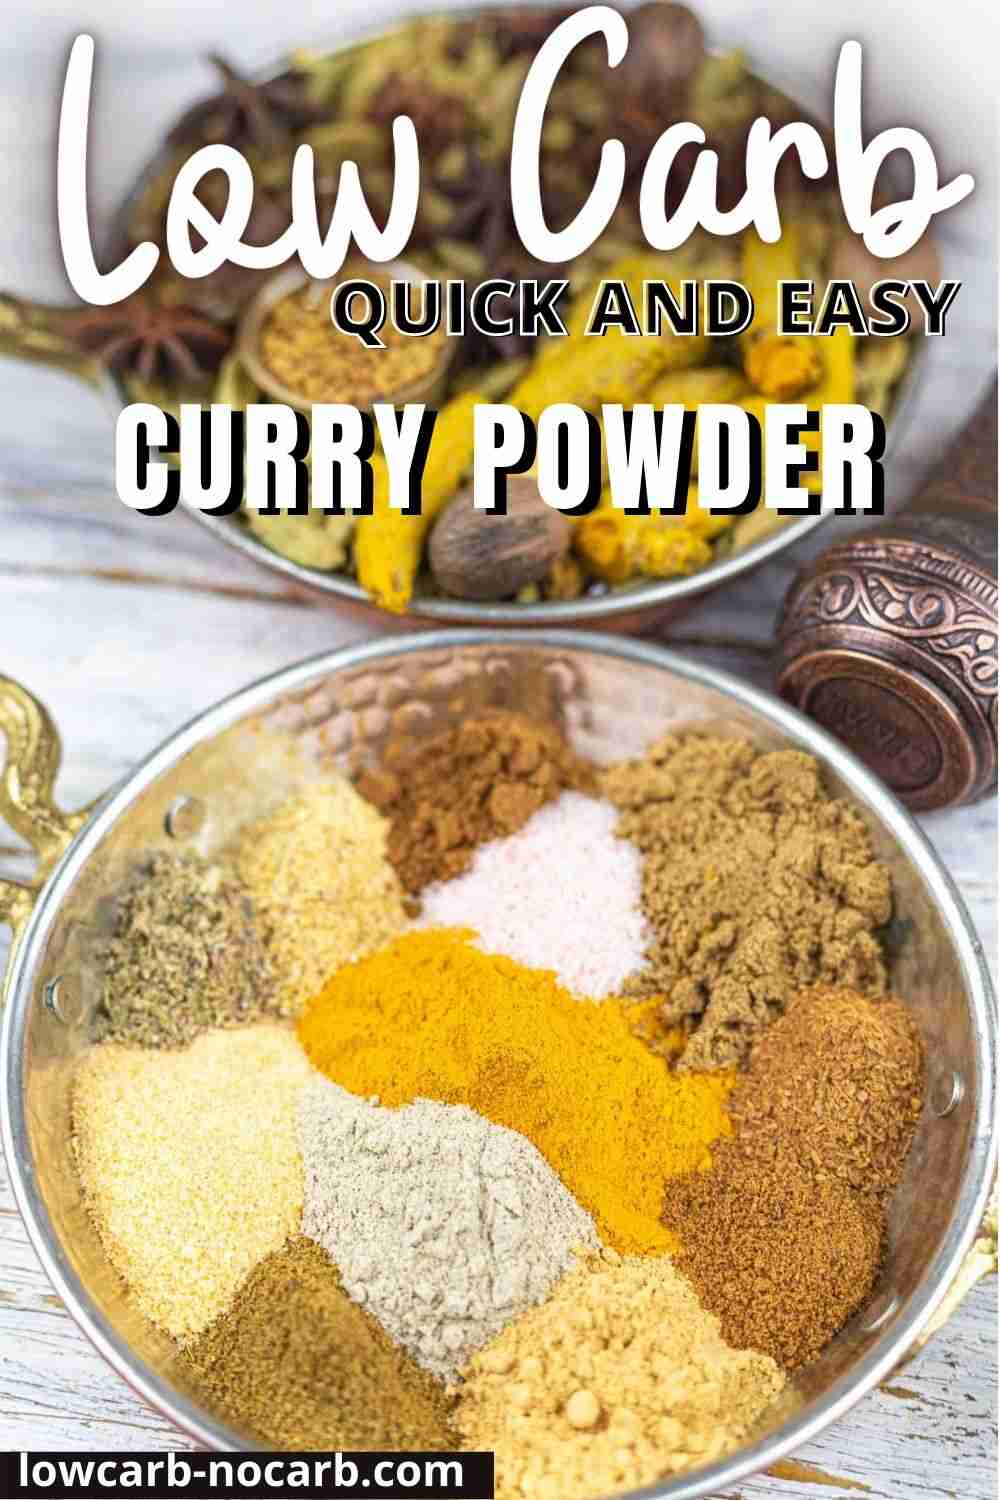 Curry seasoning replacement inside a bowl ready to blend together.